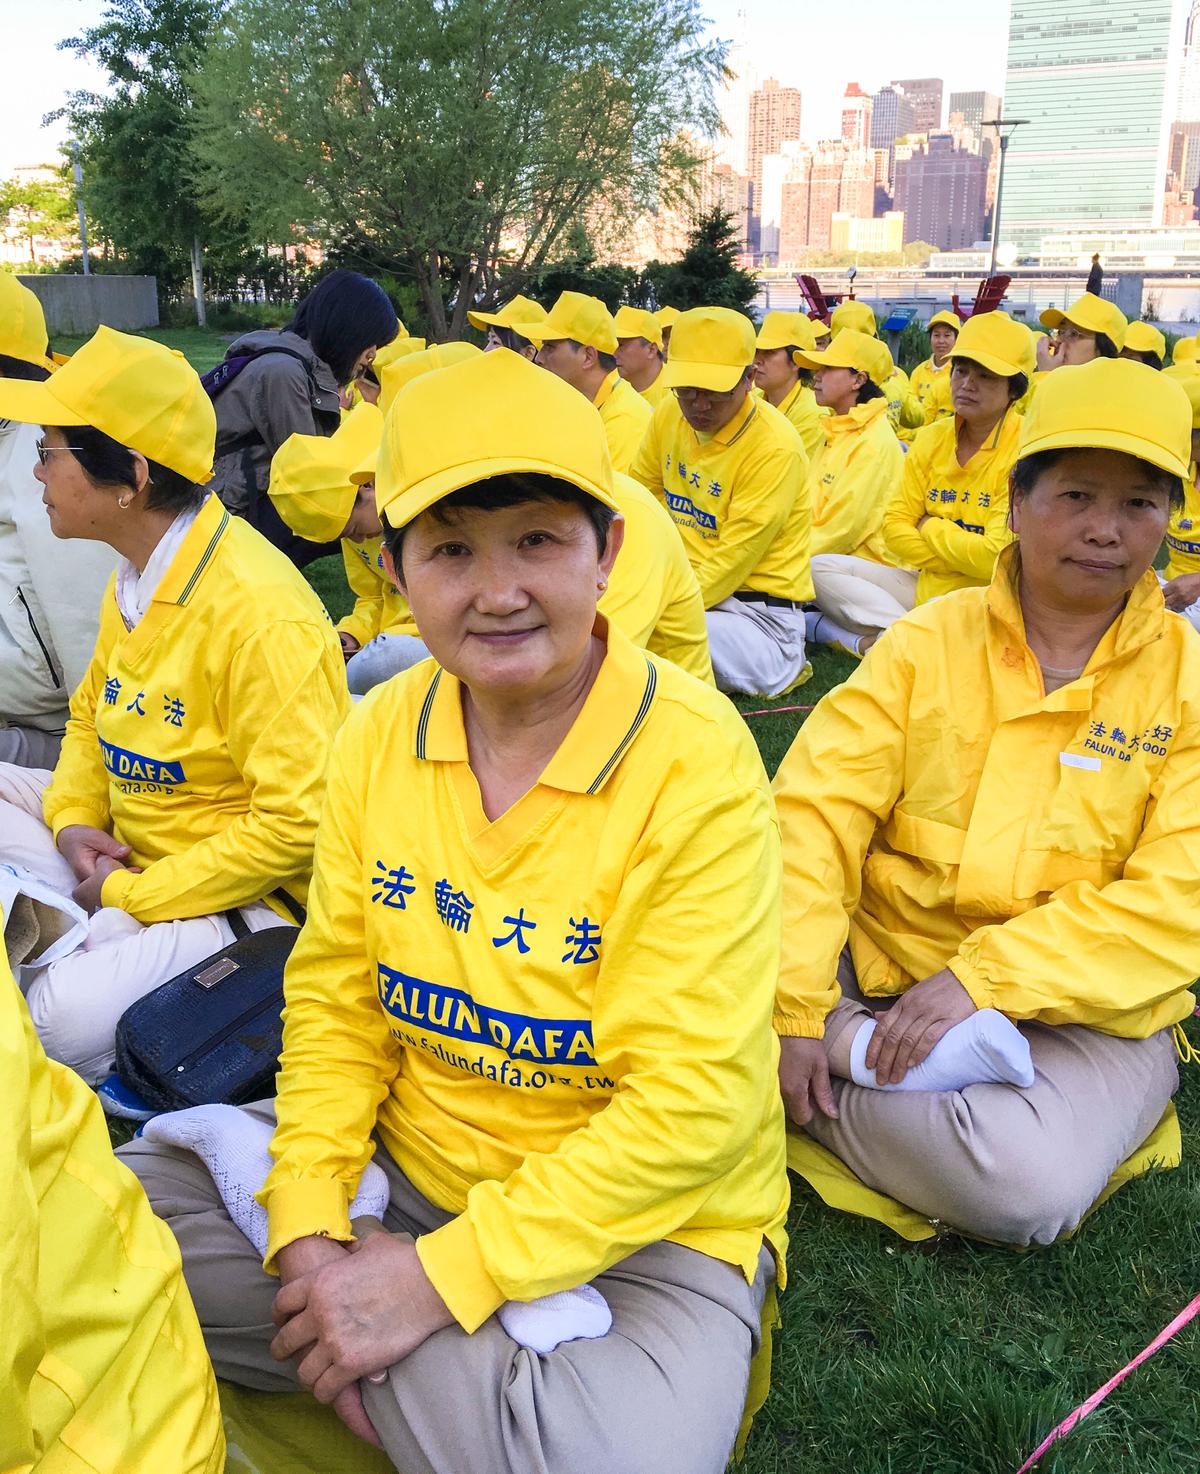 Zhang Guanghua (C), a Falun Gong practitioner from Beijing, joins a character formation event at Gantry Plaza State Park on May 12, 2016. (Larry Ong/Epoch Times)